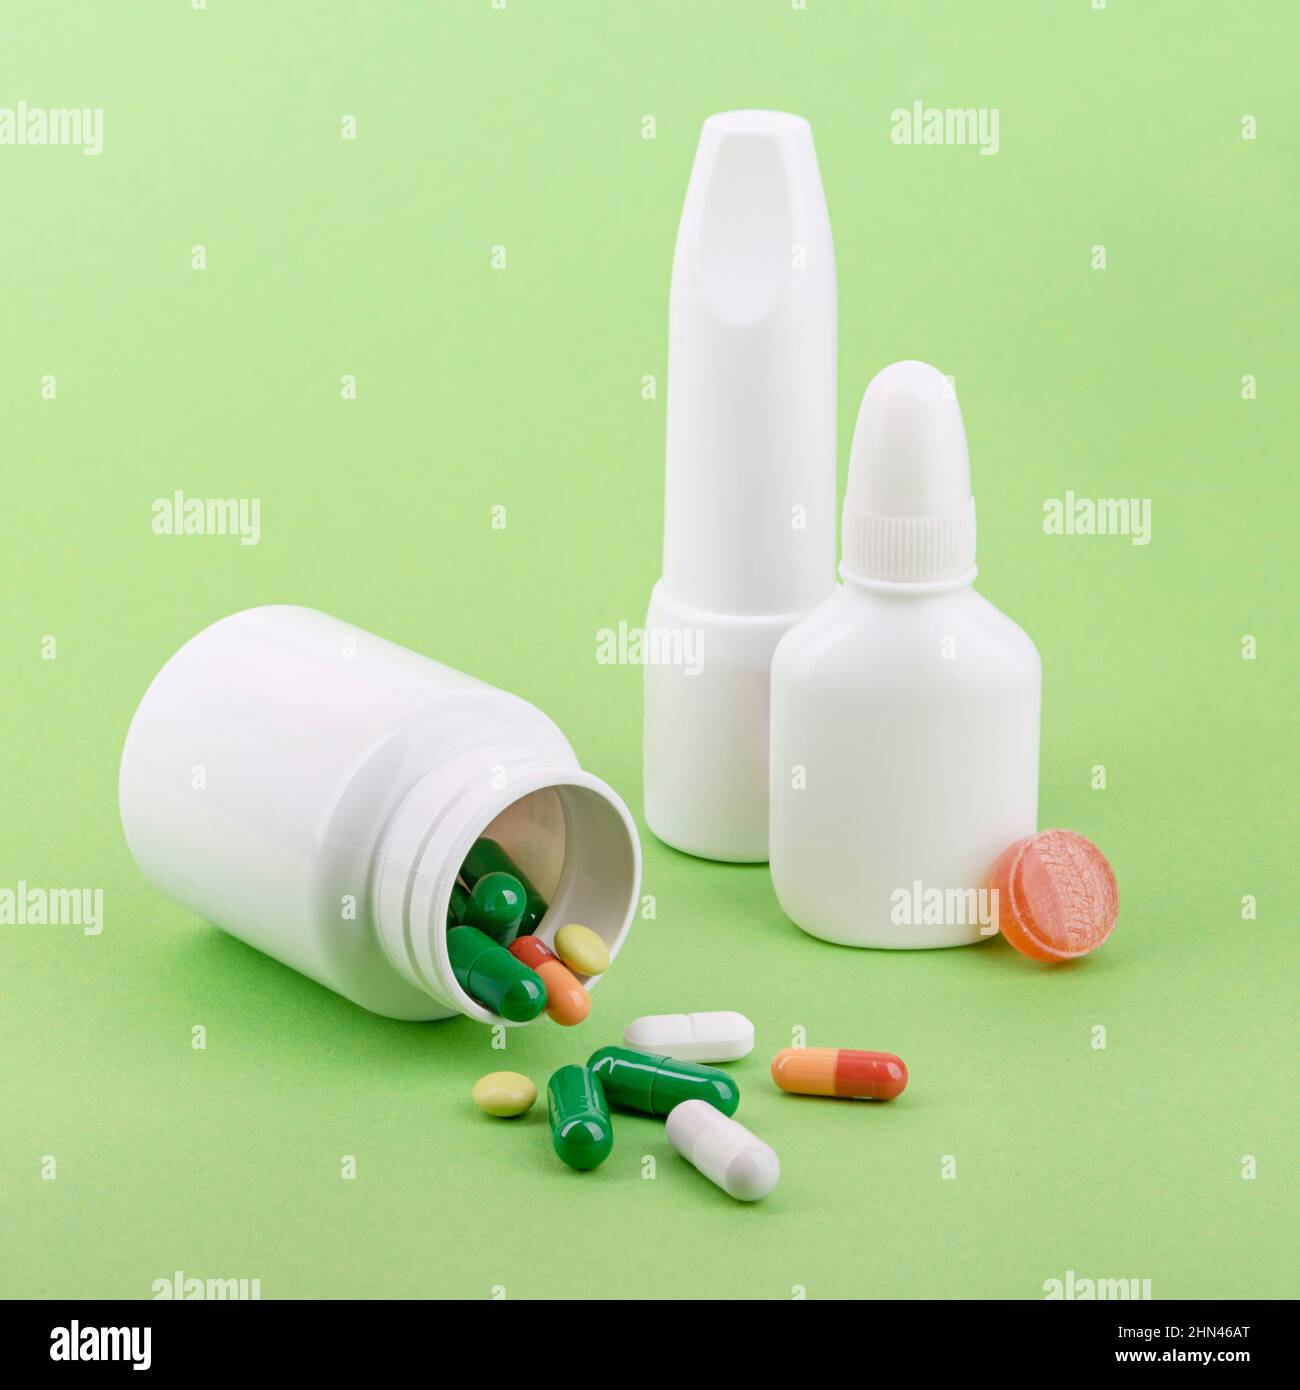 Medicine bottles and pills for respiratory disease therapy. Green background. Stock Photo